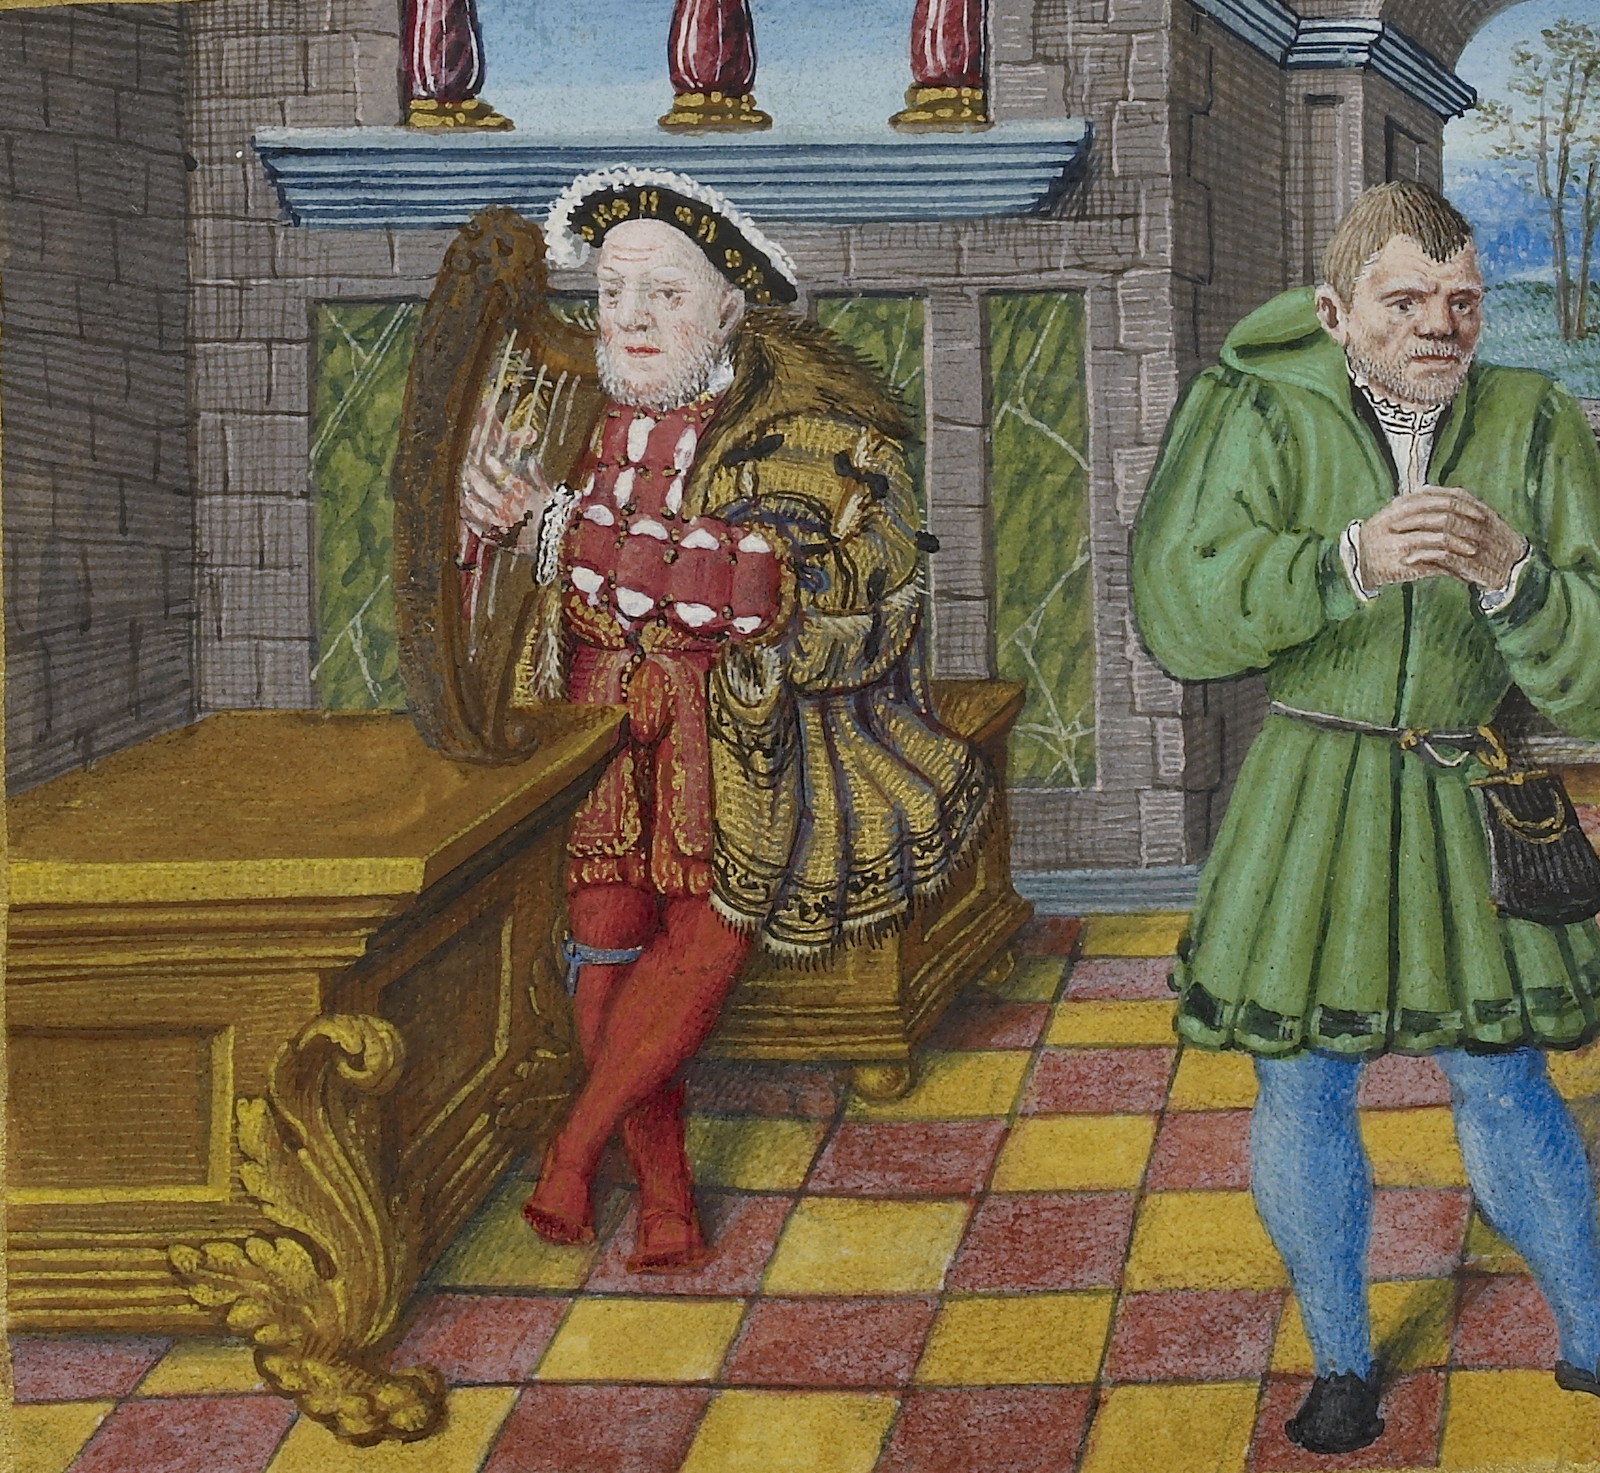 Somer’s day: page from the Psalter of Henry VIII showing Henry with William Somer, by Jean Maillart (or Mallard), c.1540. Bridgeman Images.